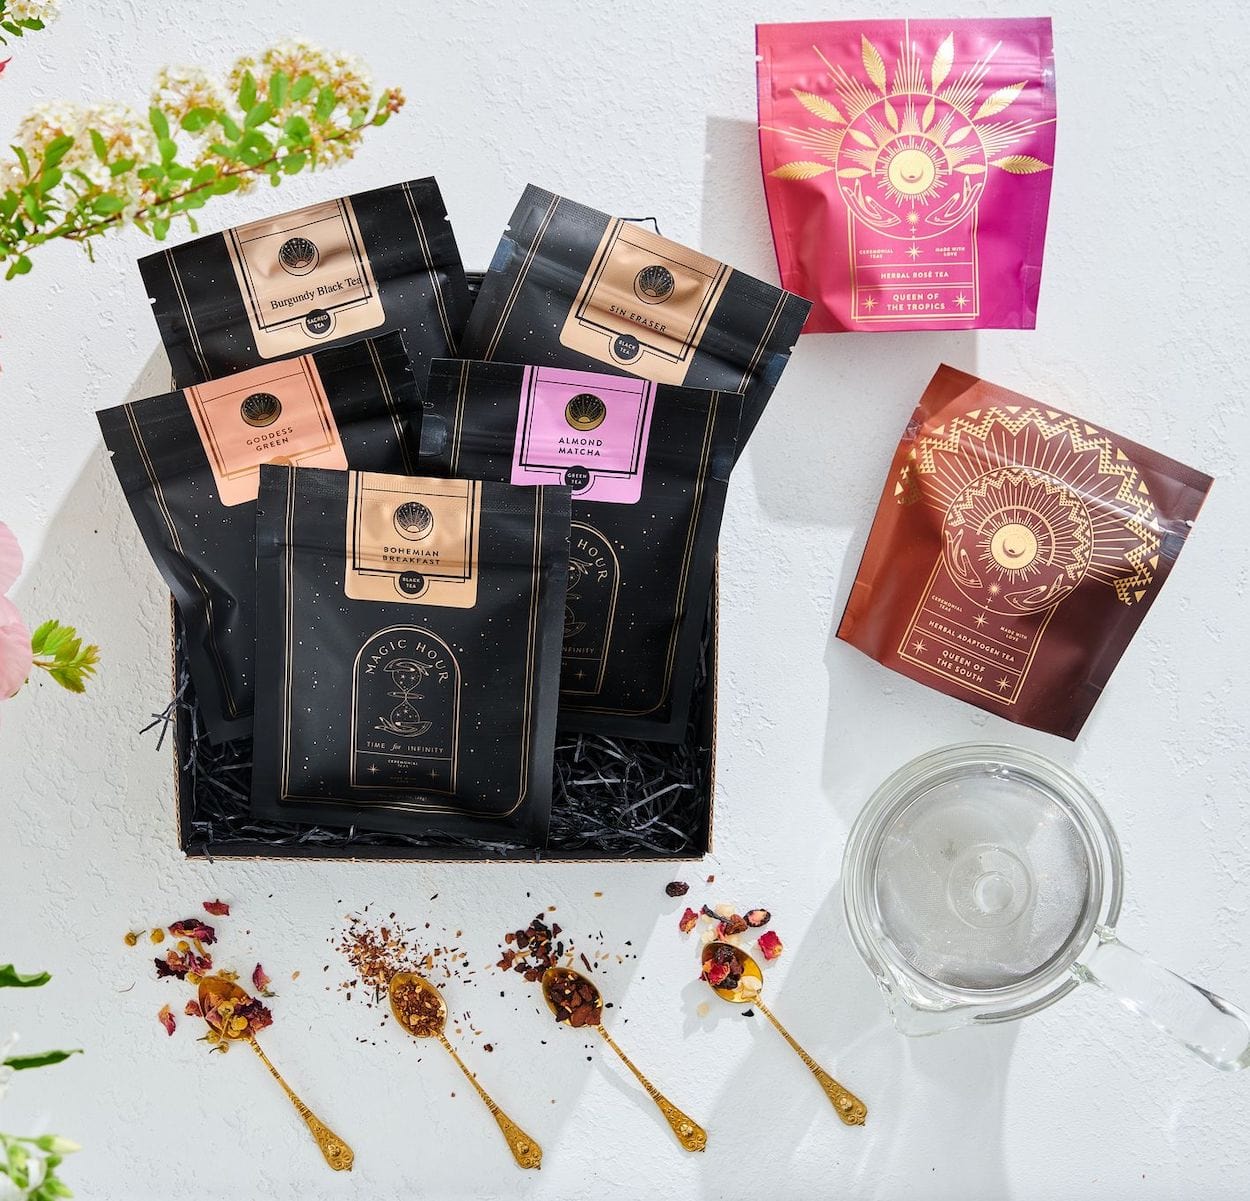 A display of various packaged tea blends, including Magic Hour's The Best of Magic Hour Sampler Set with Tea in Hand Teapot, features five black and two colored packets. The black packets have copper labels. Beside the packages are three gold spoons with loose leaf tea, a clear glass teapot, and green foliage providing a decorative touch.